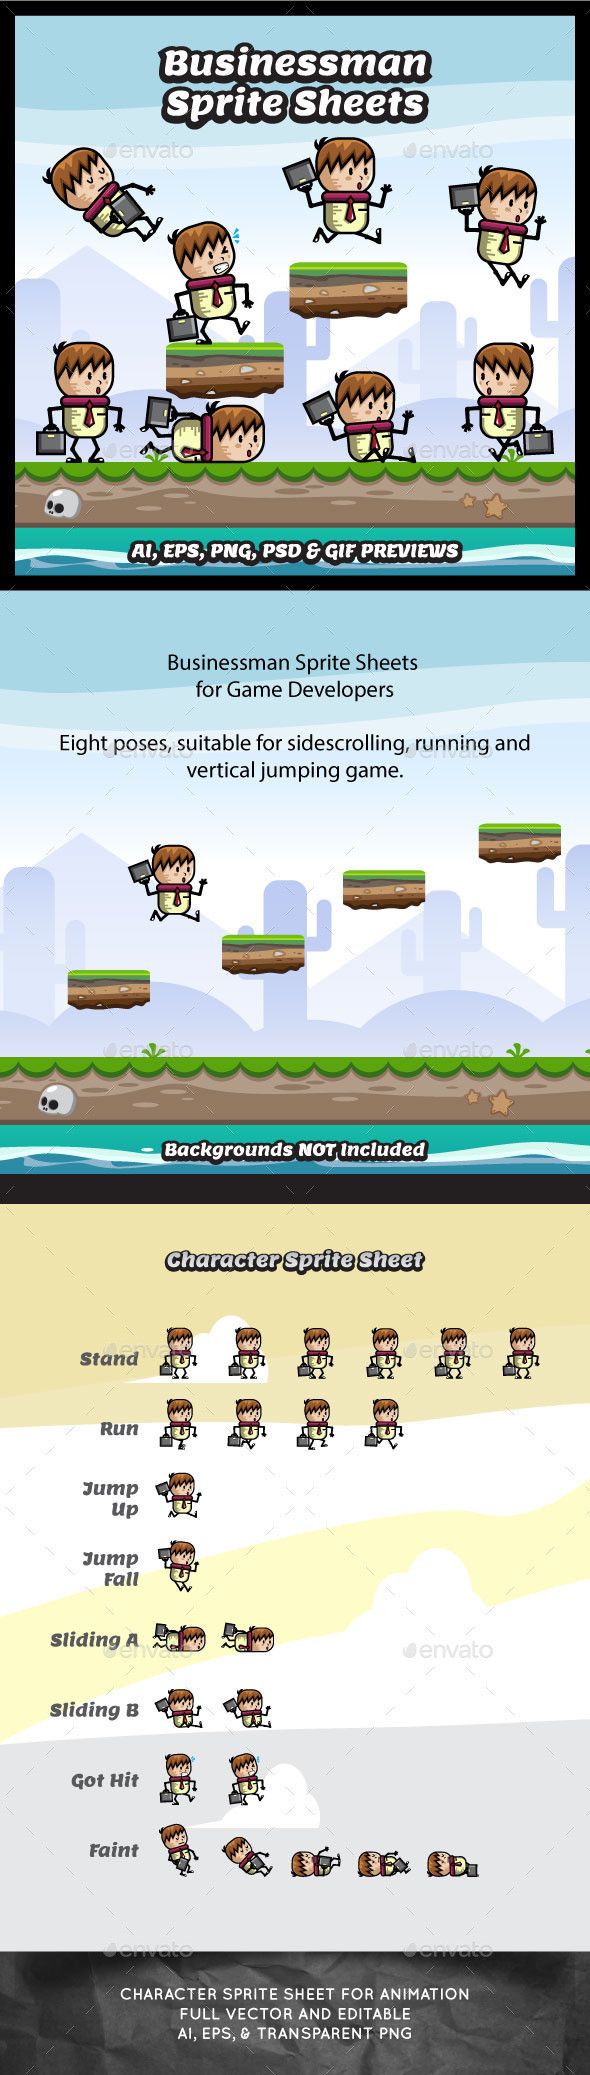 Running and jumping businessman game character sprite sheet sidescroller game asset mobile games gameart game art 590